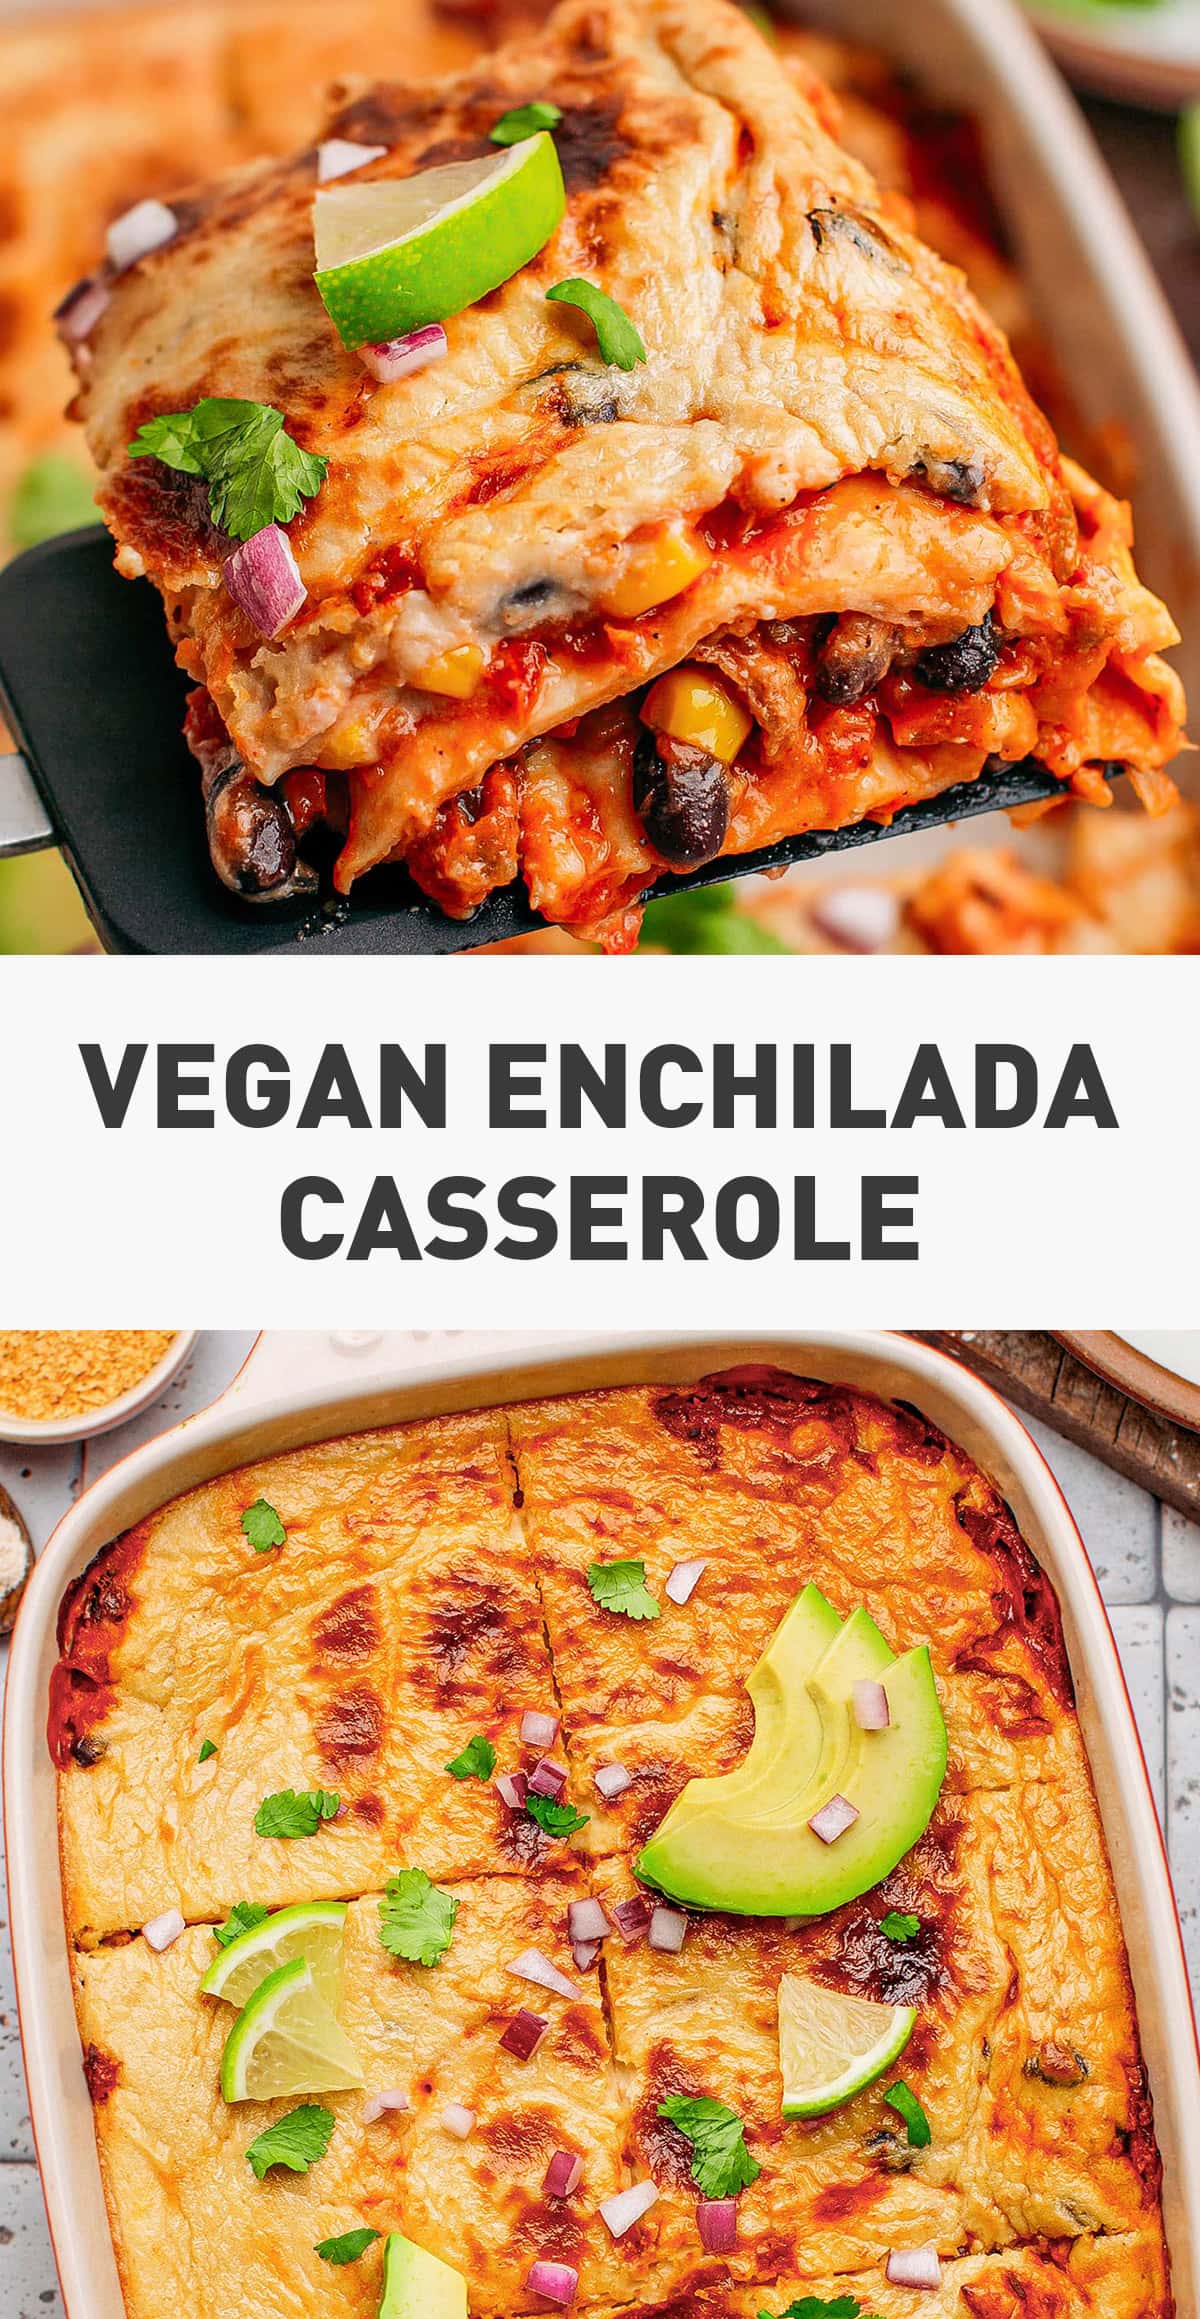 Introducing our favorite vegan enchilada casserole! Filled with meaty soy curls, red beans, and corn, this casserole is layered with tortillas, and topped with a creamy cashew cheese sauce. A flavorful and comforting family dish! #enchilada #casserole